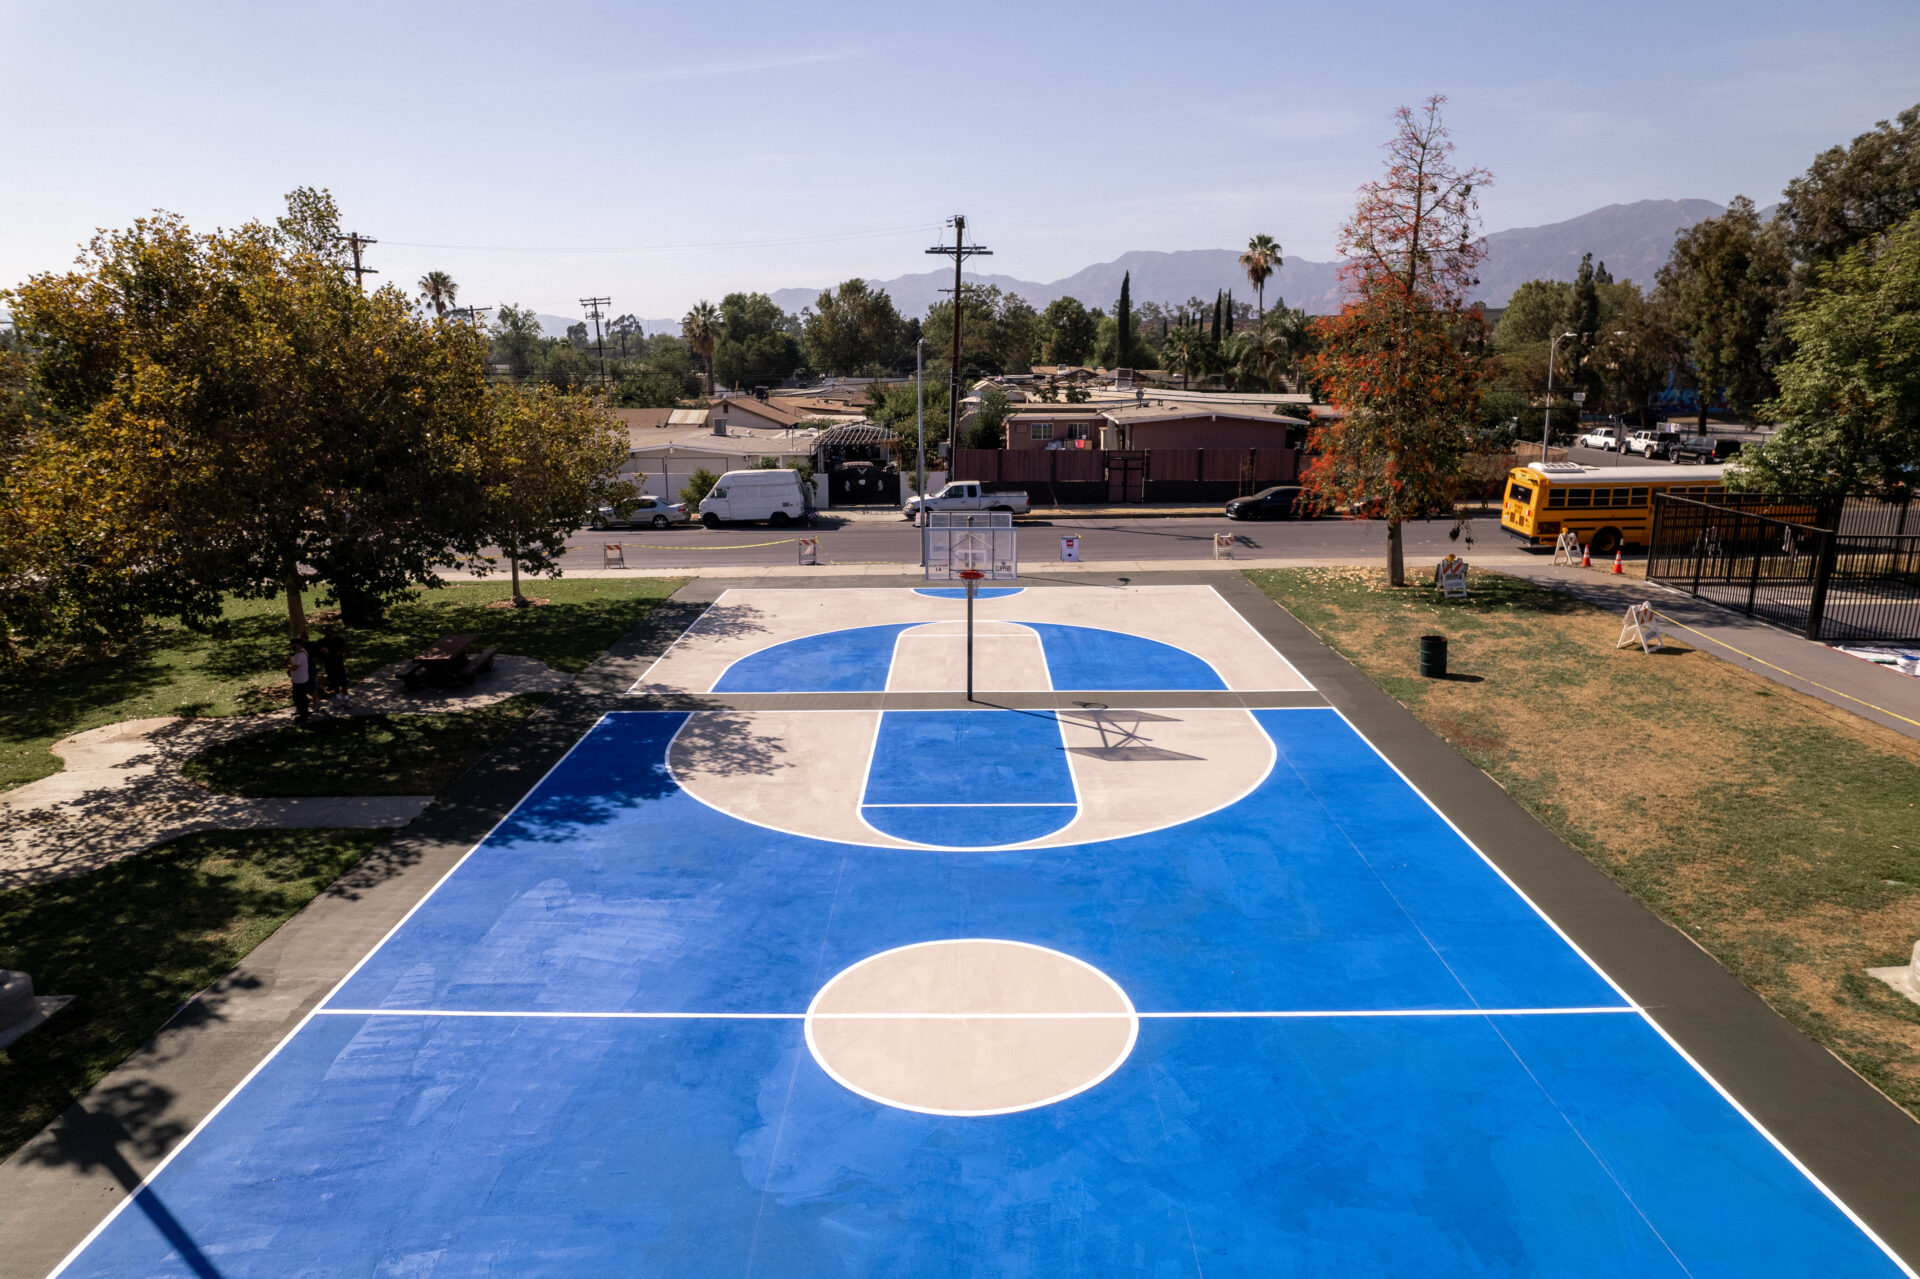 An aerial view of the blue and white painted mural on a basketball court in Pacoima, Los Angeles. The mural uses reflective paint that reduces surface temperatures.